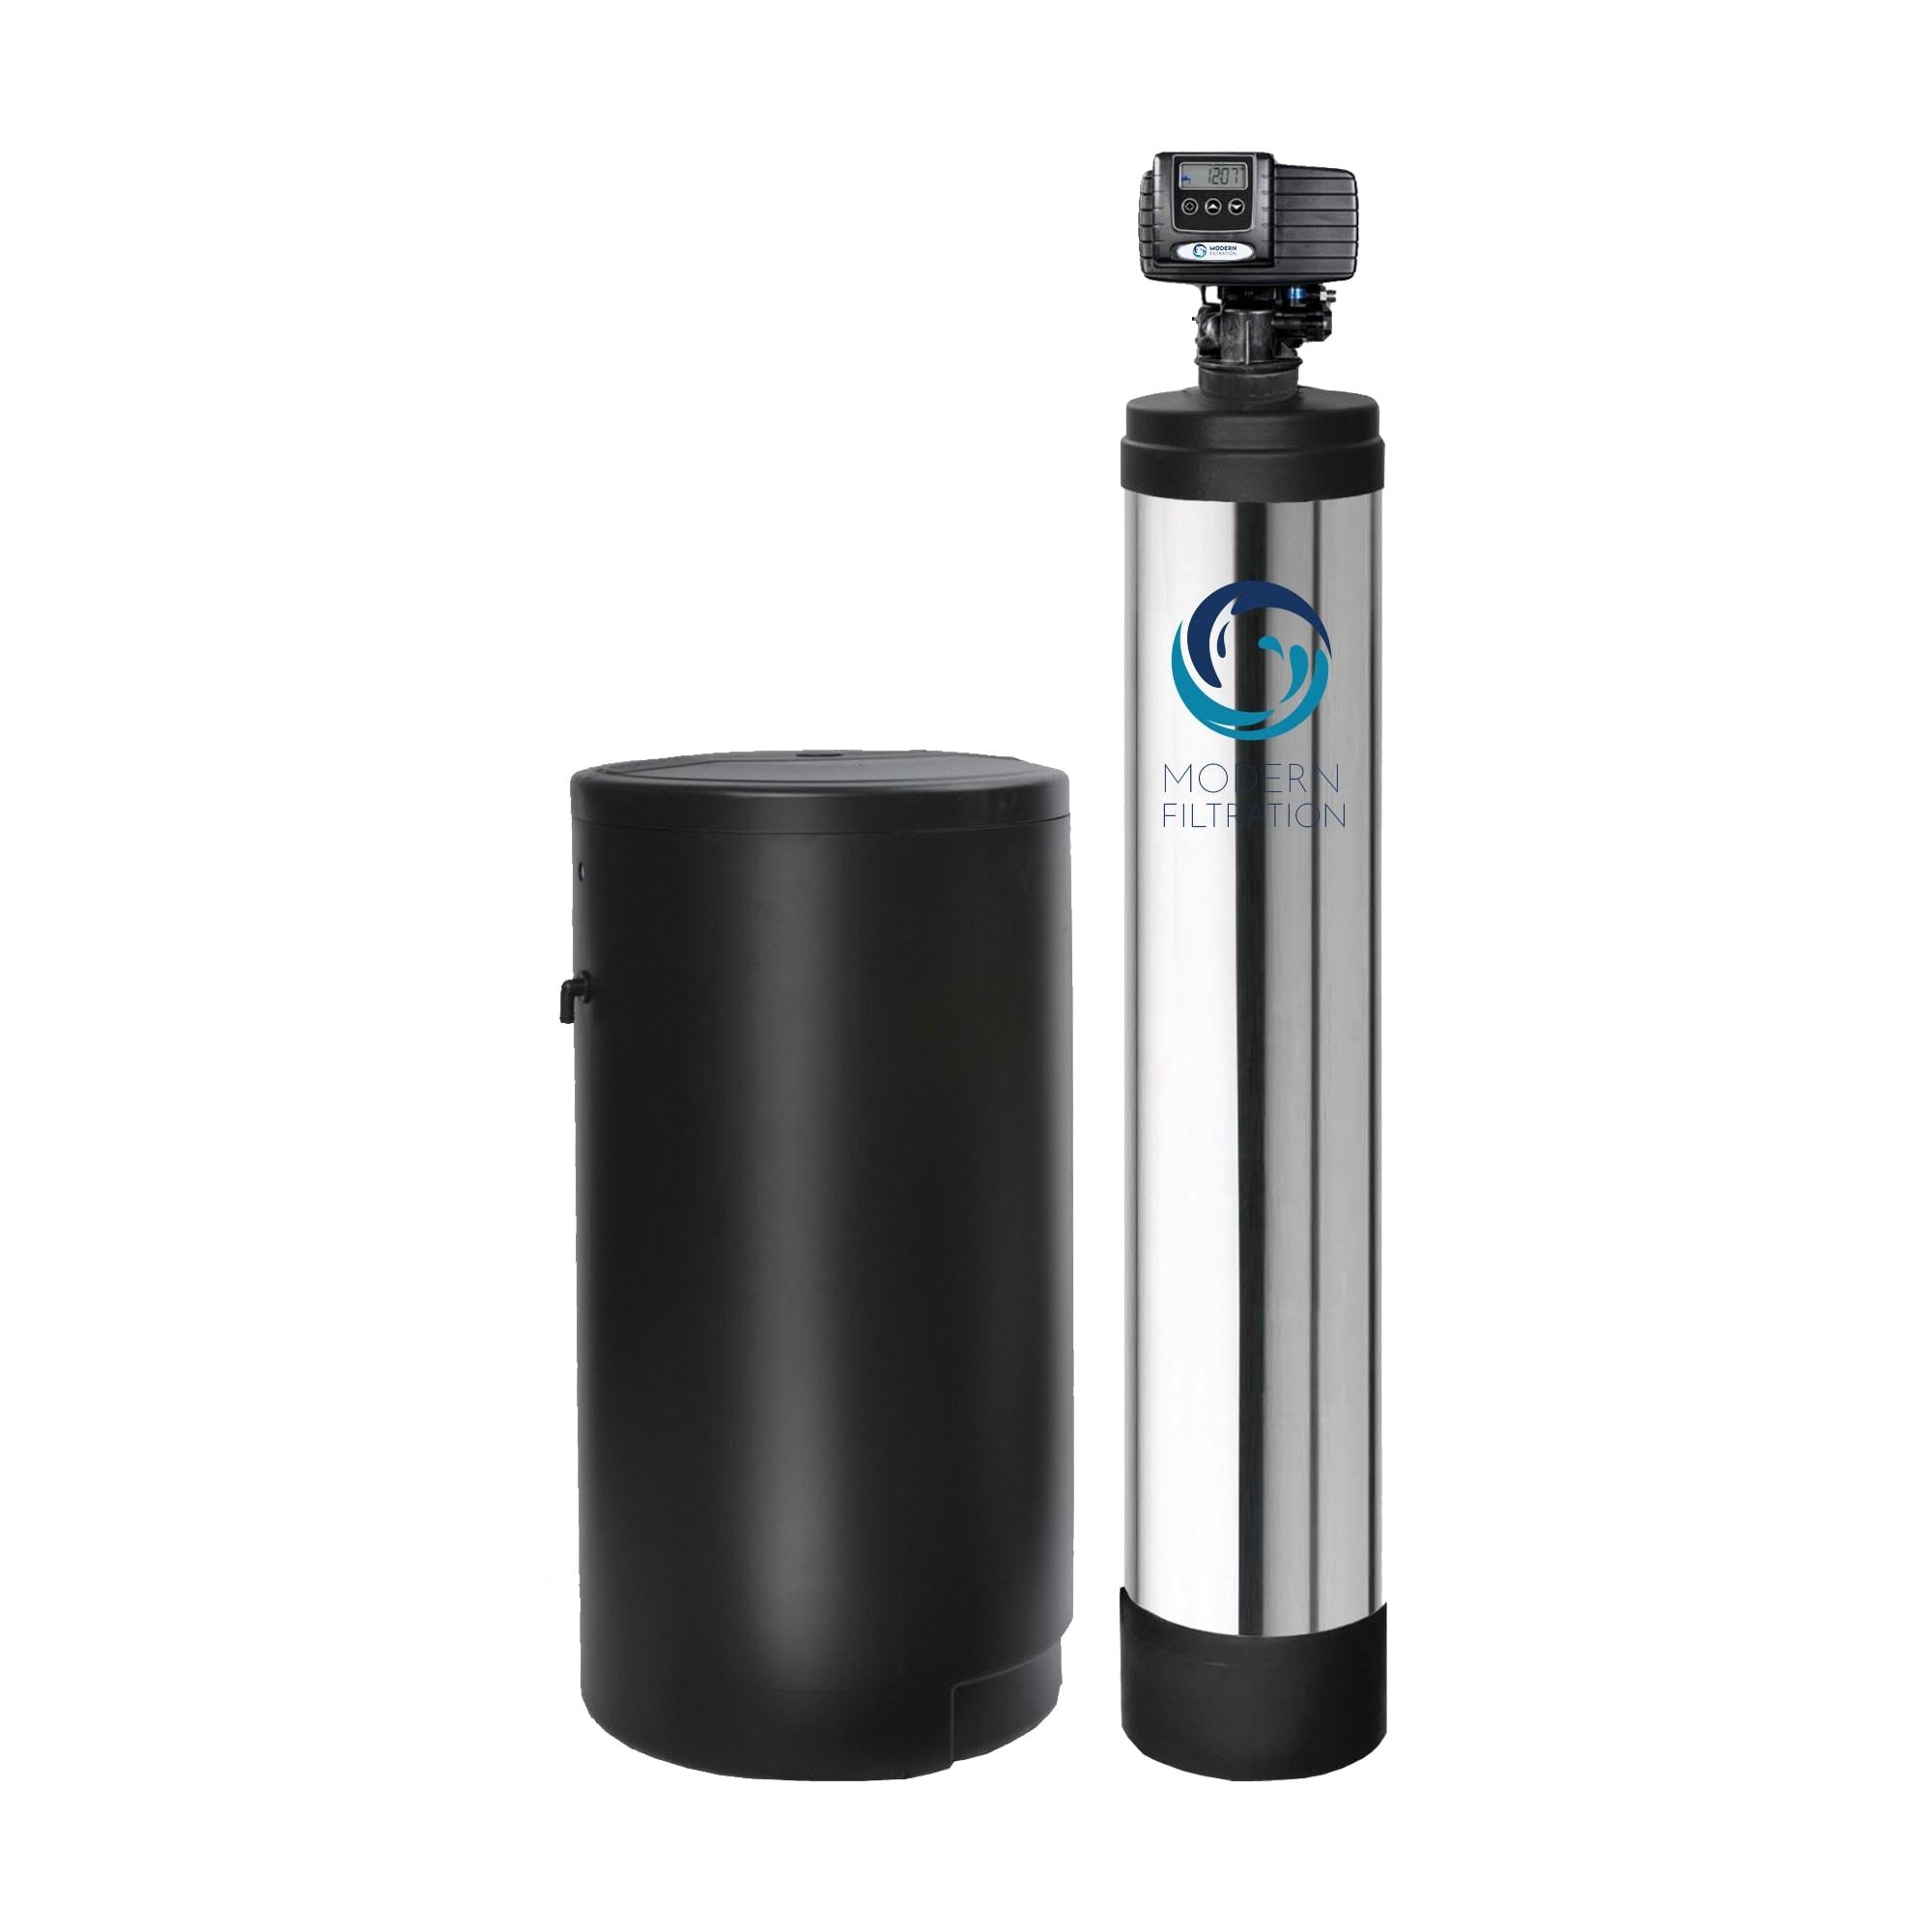 Modern Filtration Dual Premier 5-Stage Whole House Well Water Filtration & Softening System